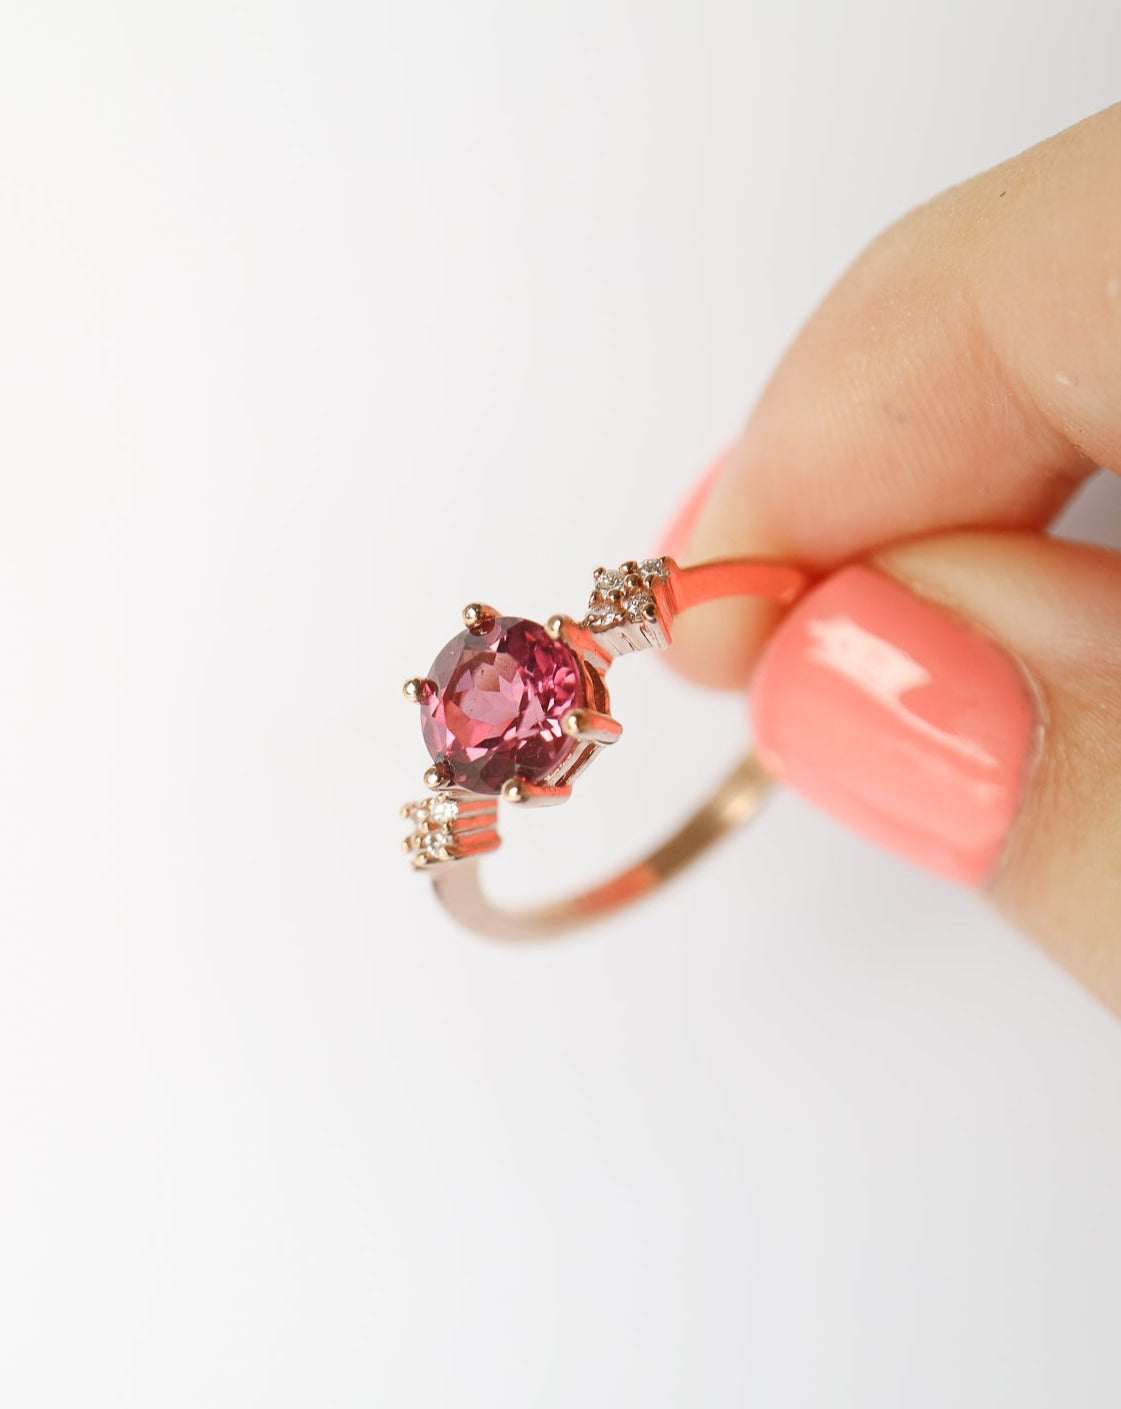 9kt rose gold engagement ring with pink tourmaline